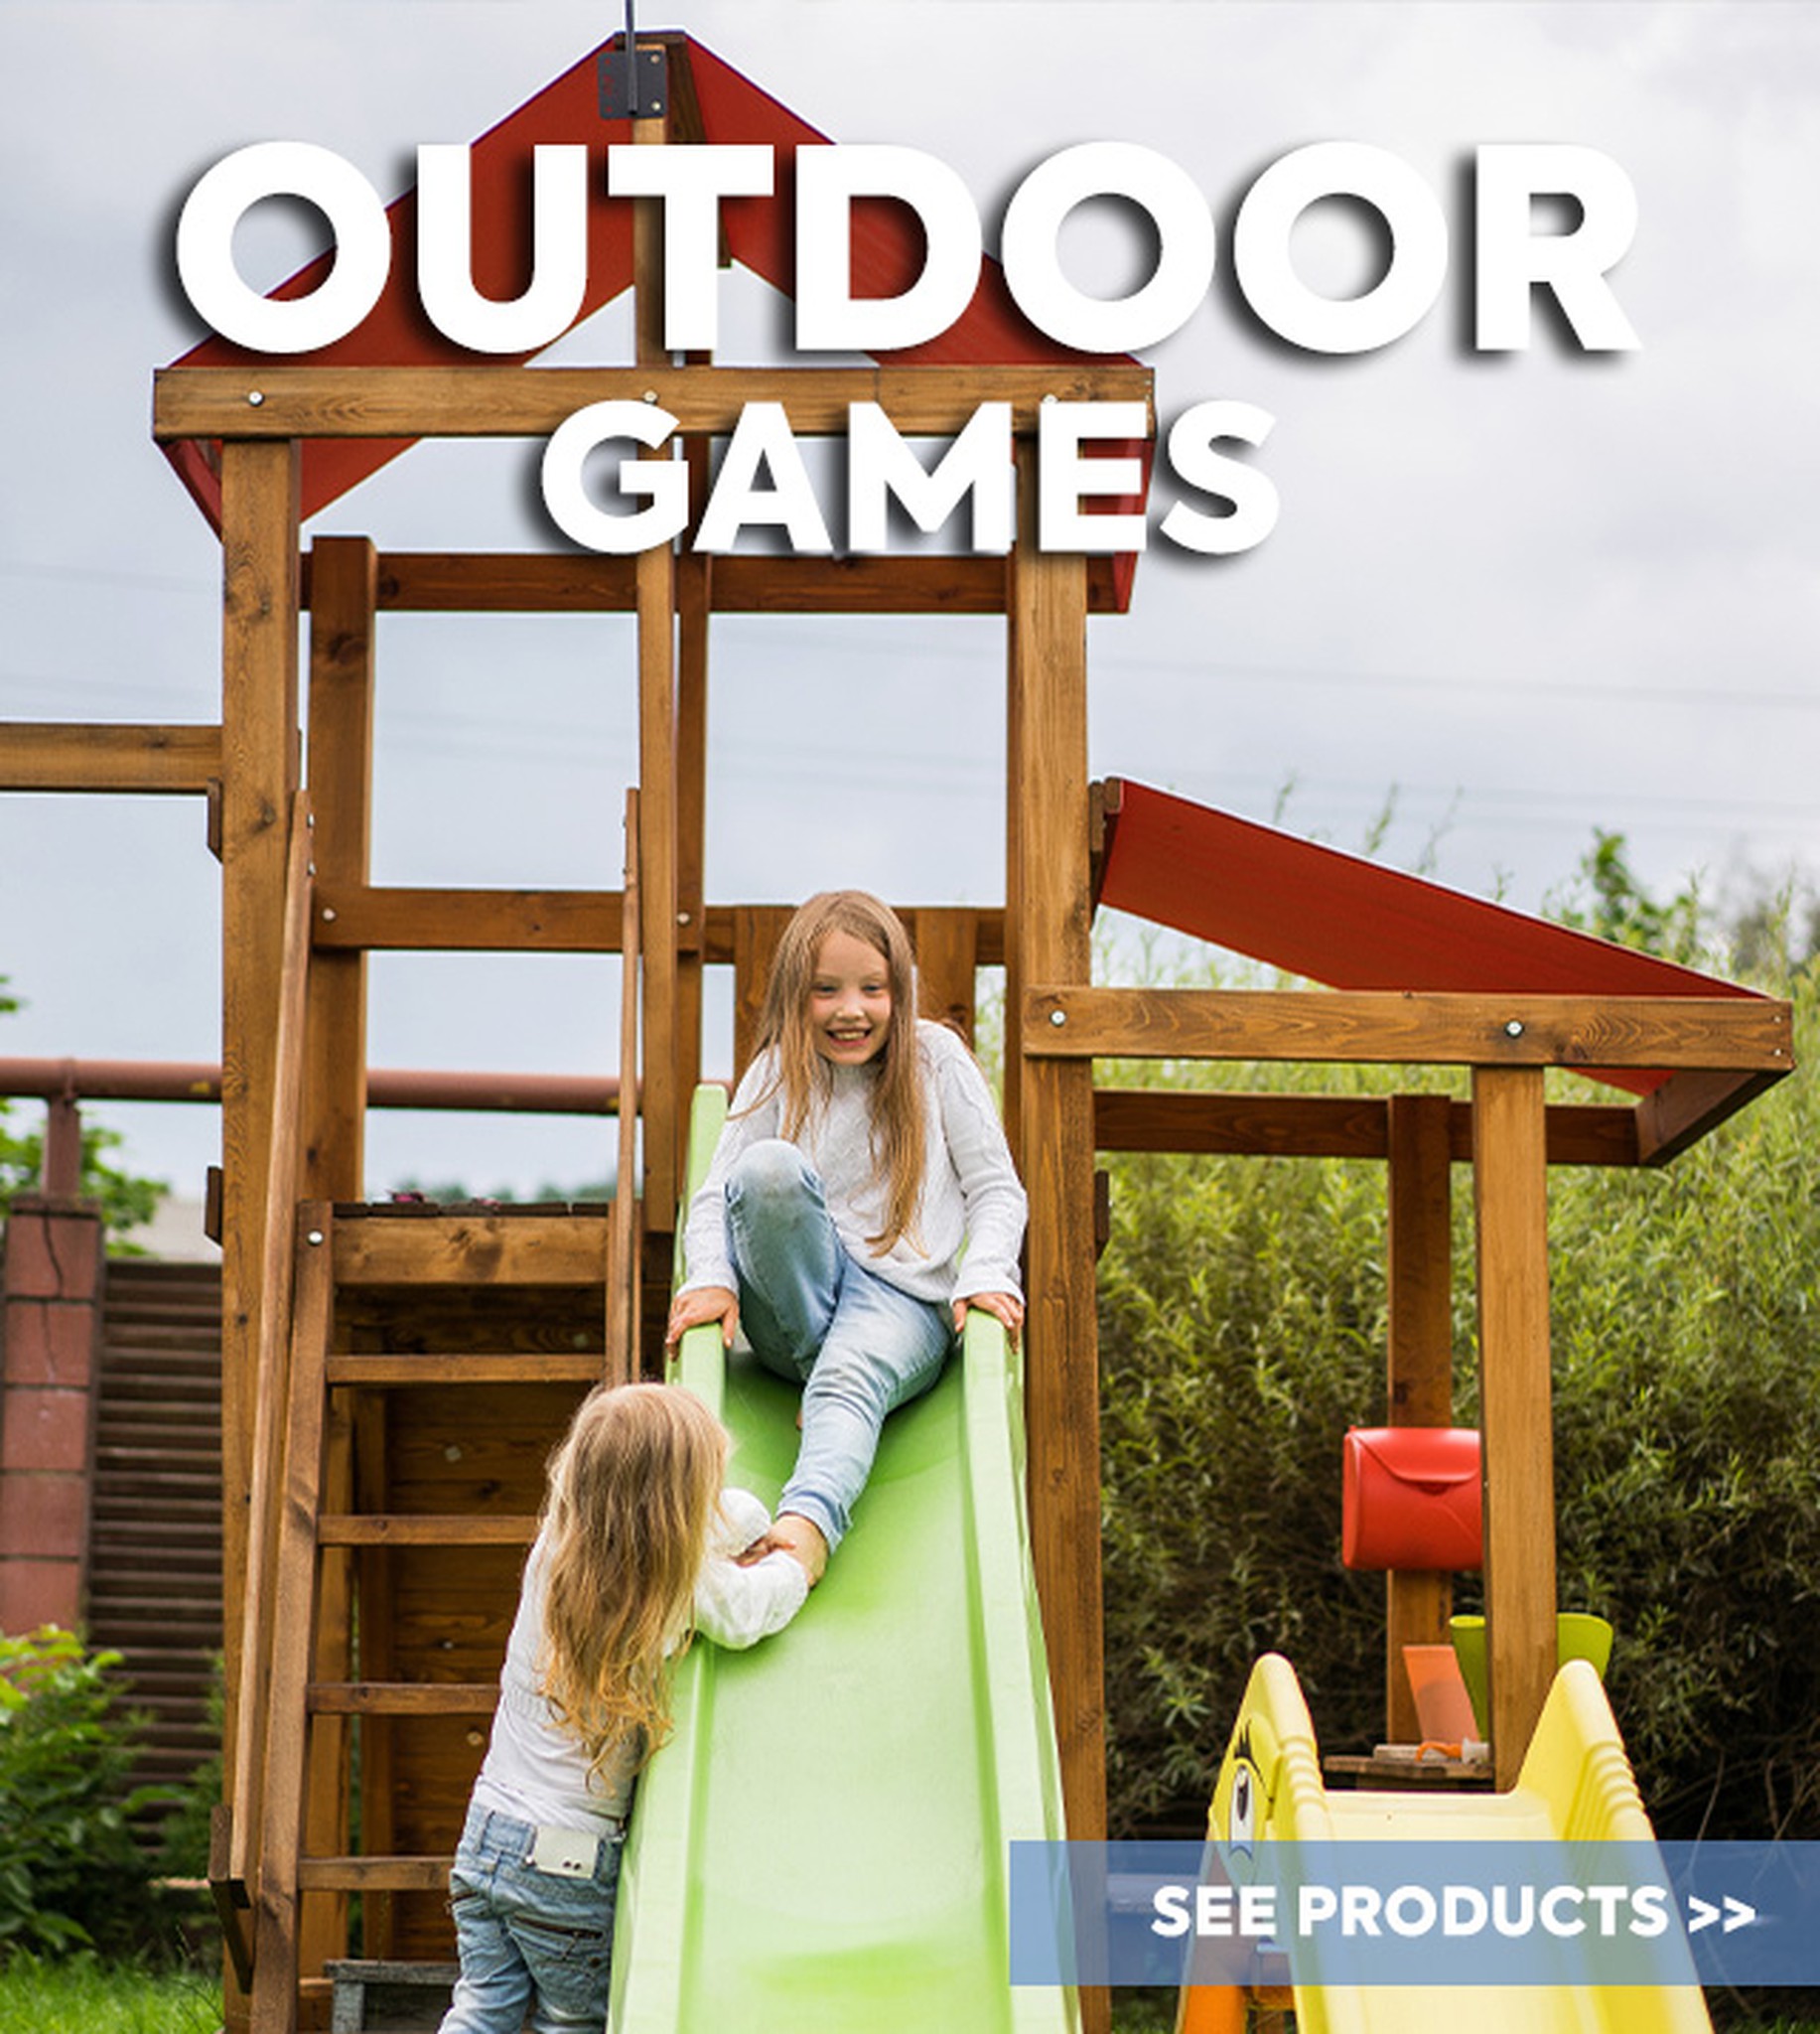 Outdoor games with the best discounts